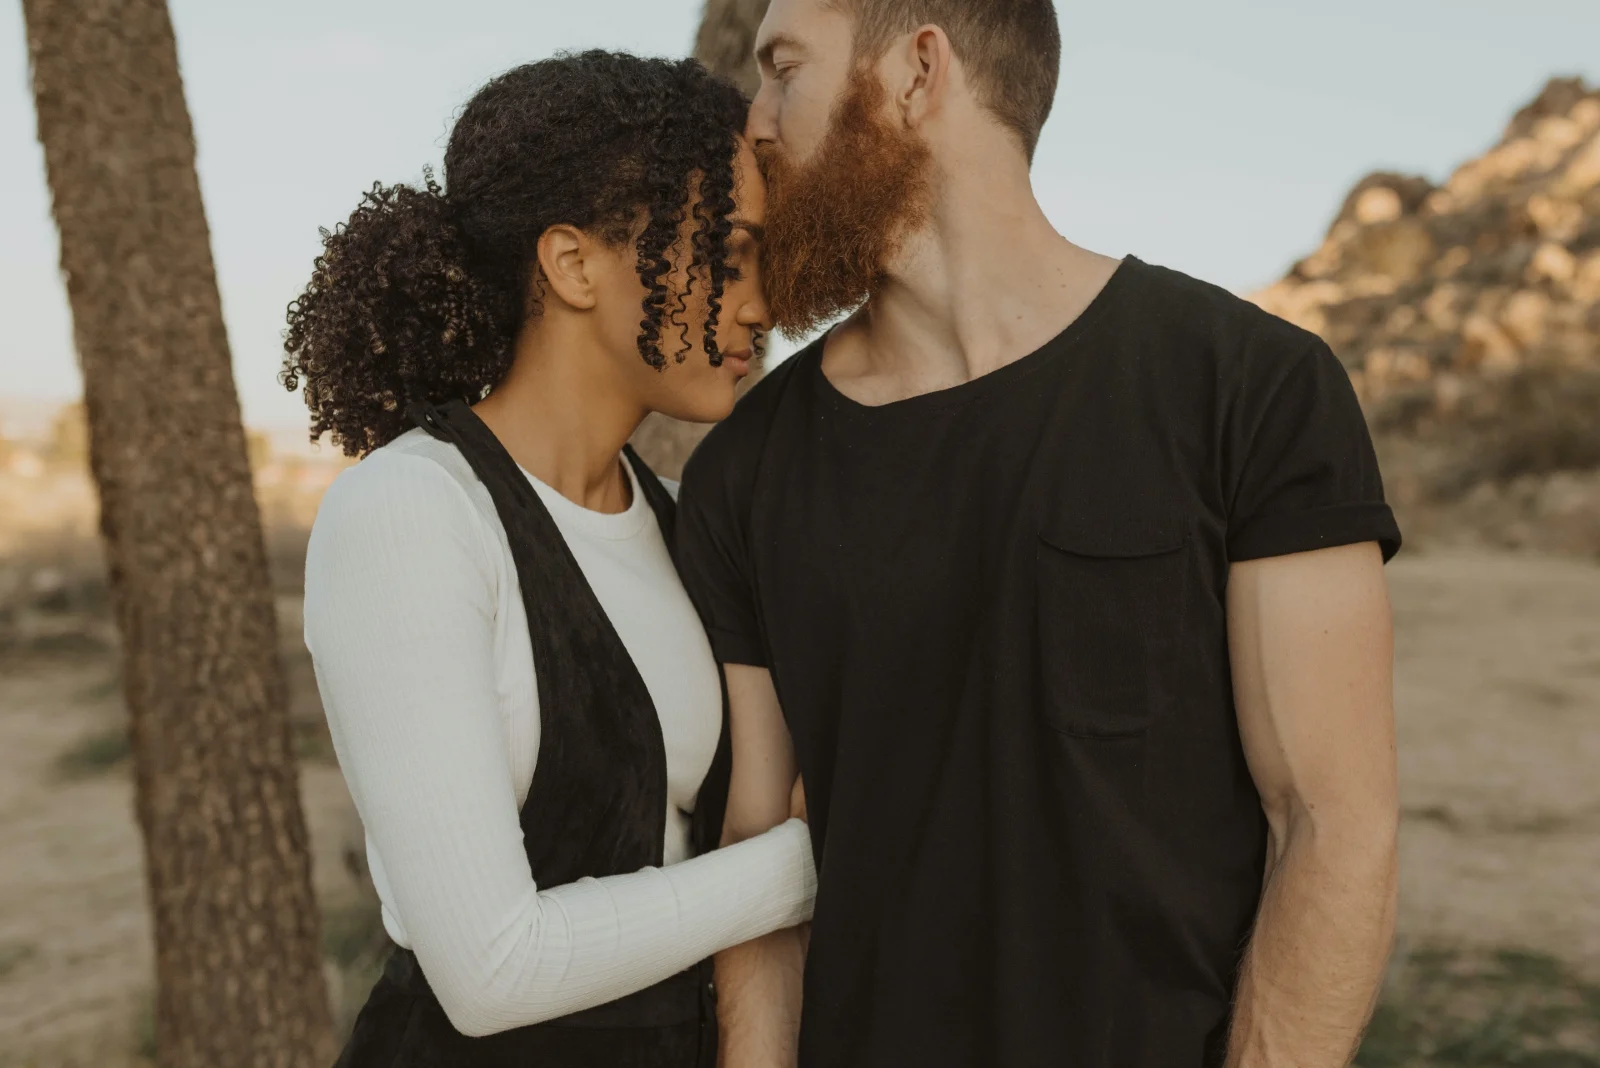 man kissing woman's forehead while standing near tree